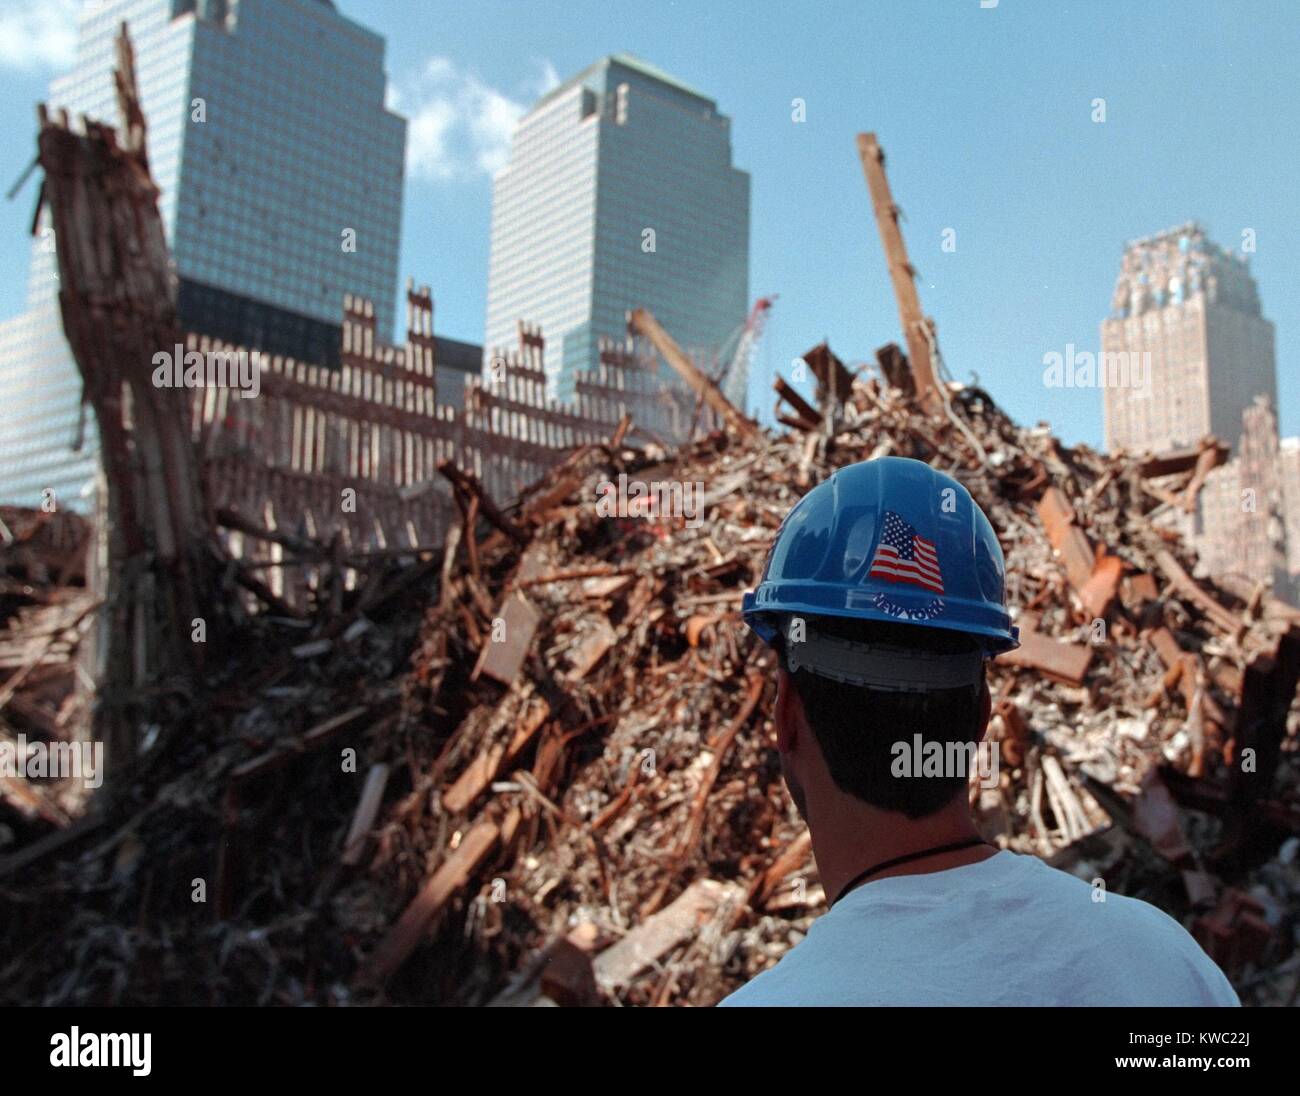 Worker at the 'pile' of rubble from the collapse of WTC 2, the South Tower on Oct. 3, 2001. The ruins of the Twin Towers formed 15 meters high piles. In the background are damaged but repairable buildings: L-R: World Financial Center 2 and 3, and the New York Telephone Building (Verizon Building). (BSLOC 2015 2 111) Stock Photo